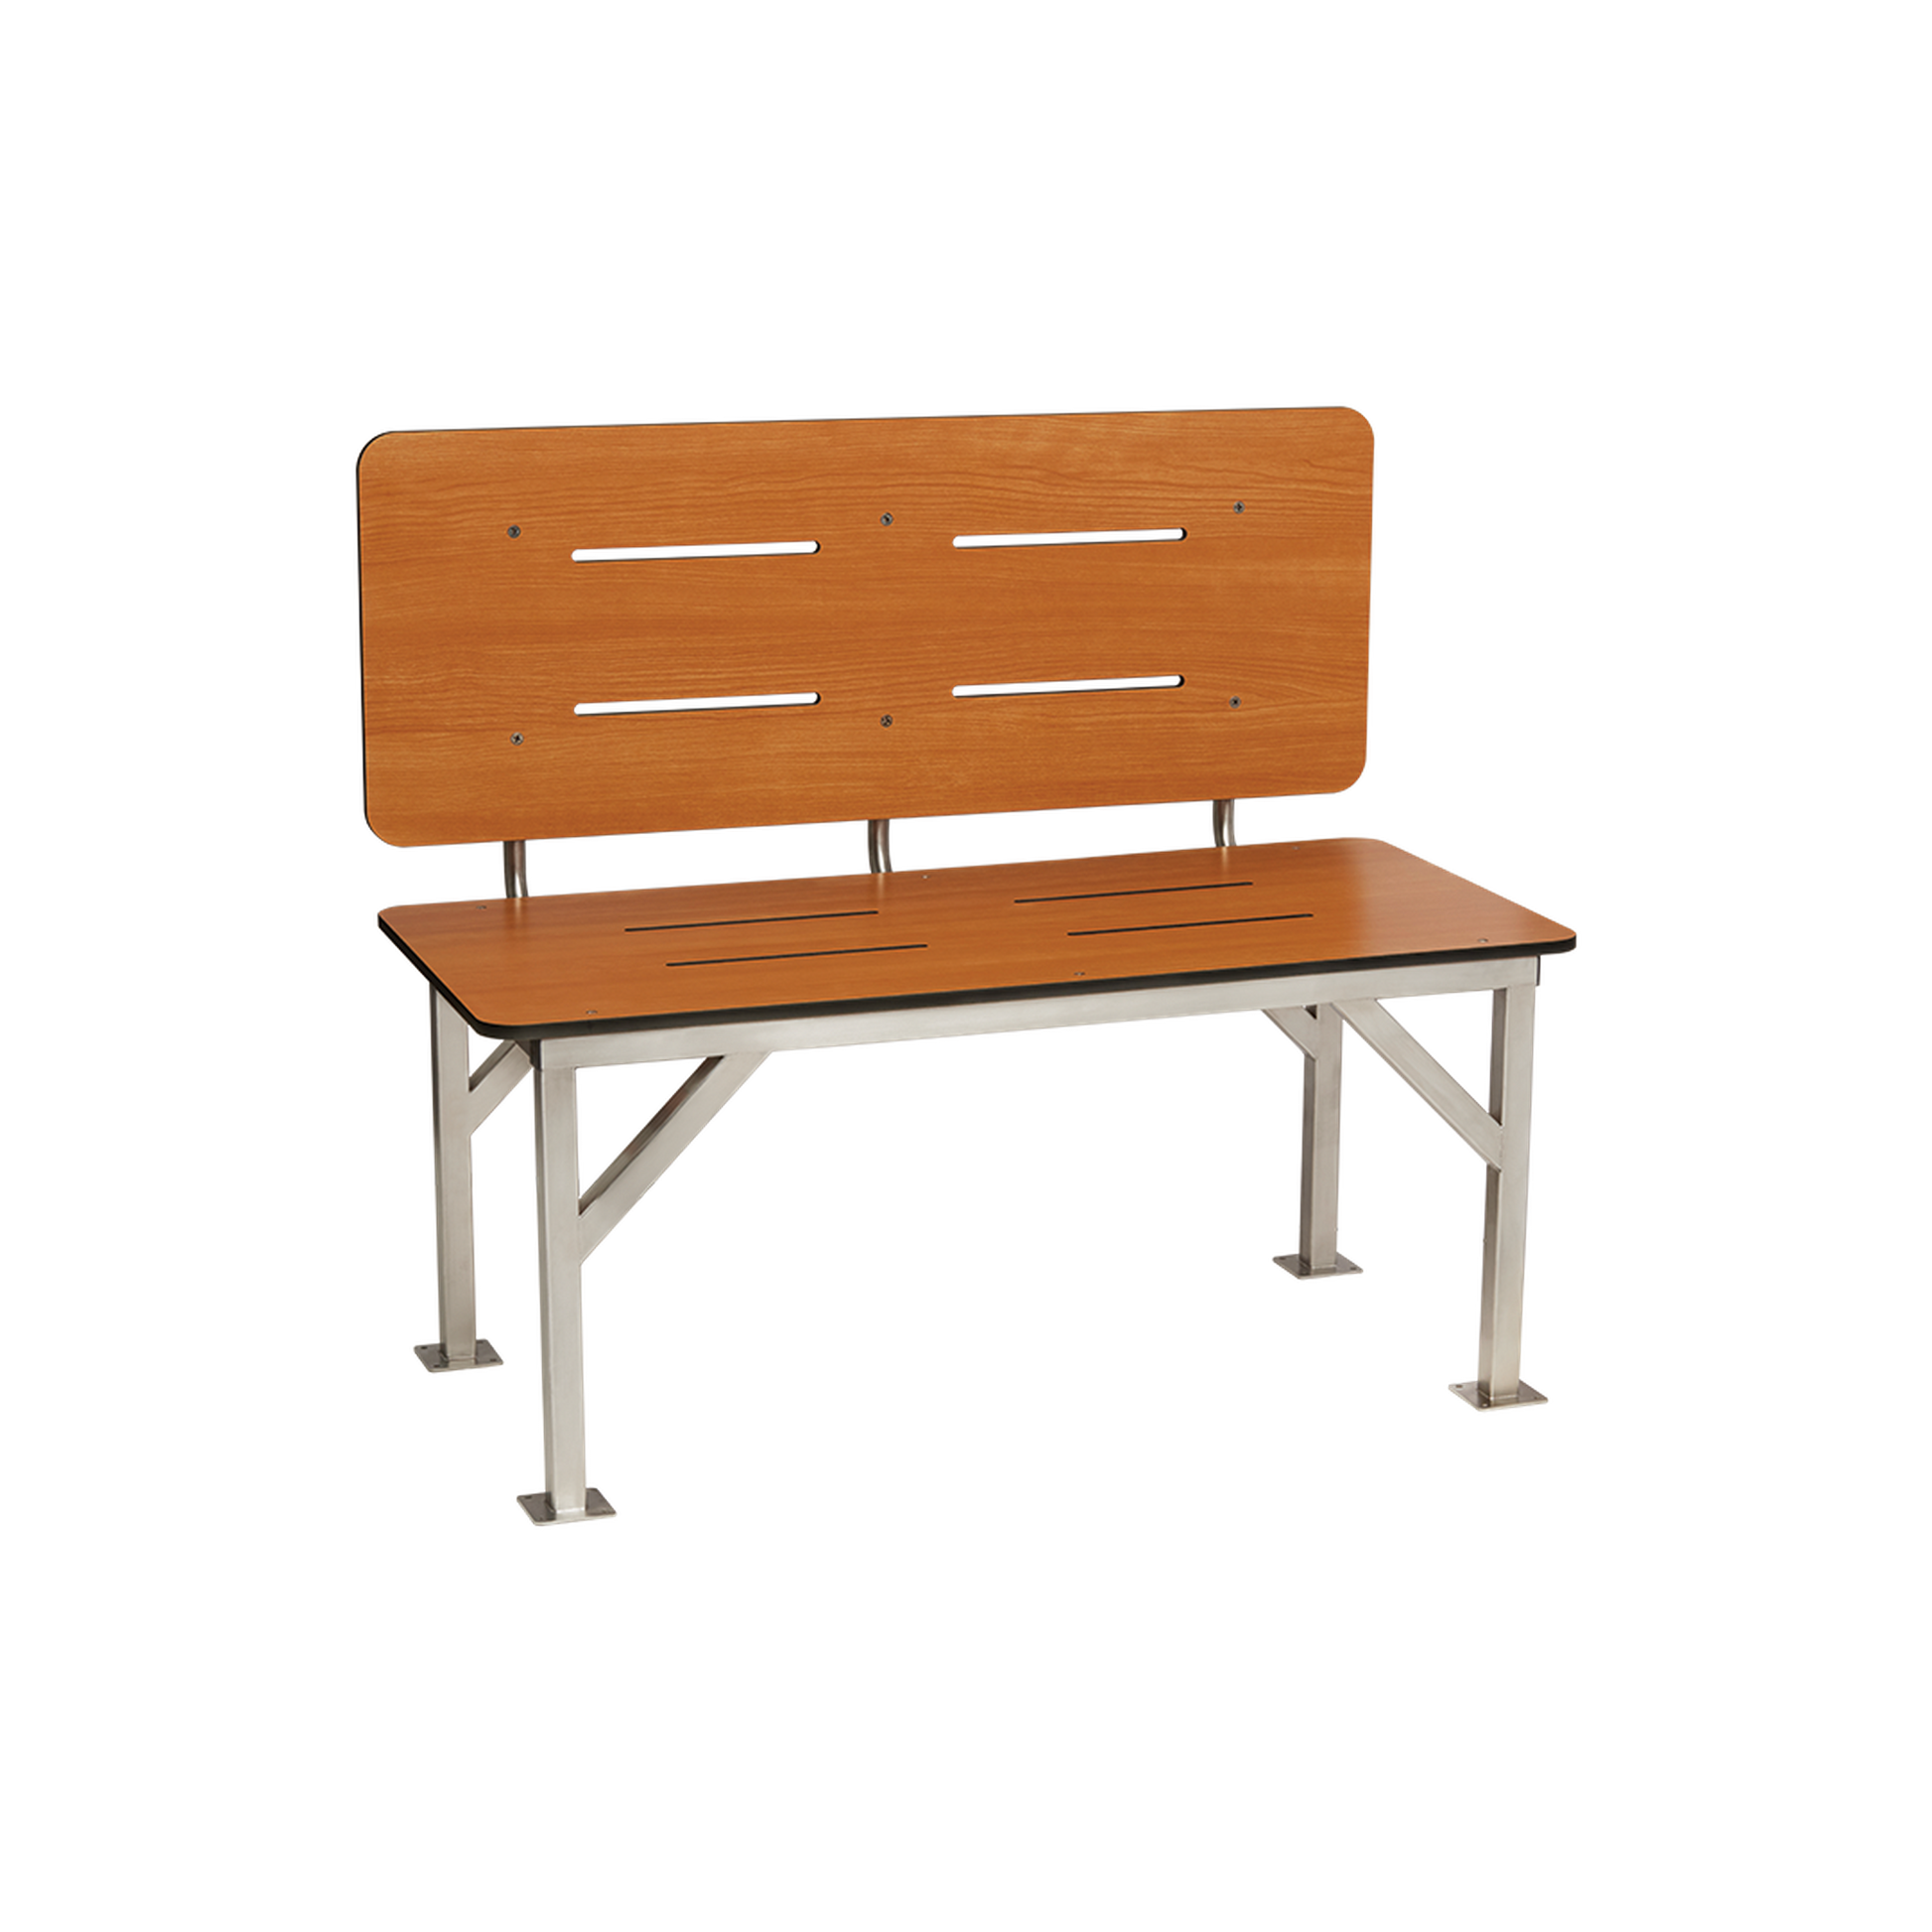 Seachrome Signature Series 42" W x 20" D Teak One-Piece Solid Phenolic Stationary Bench Seat With Backrest